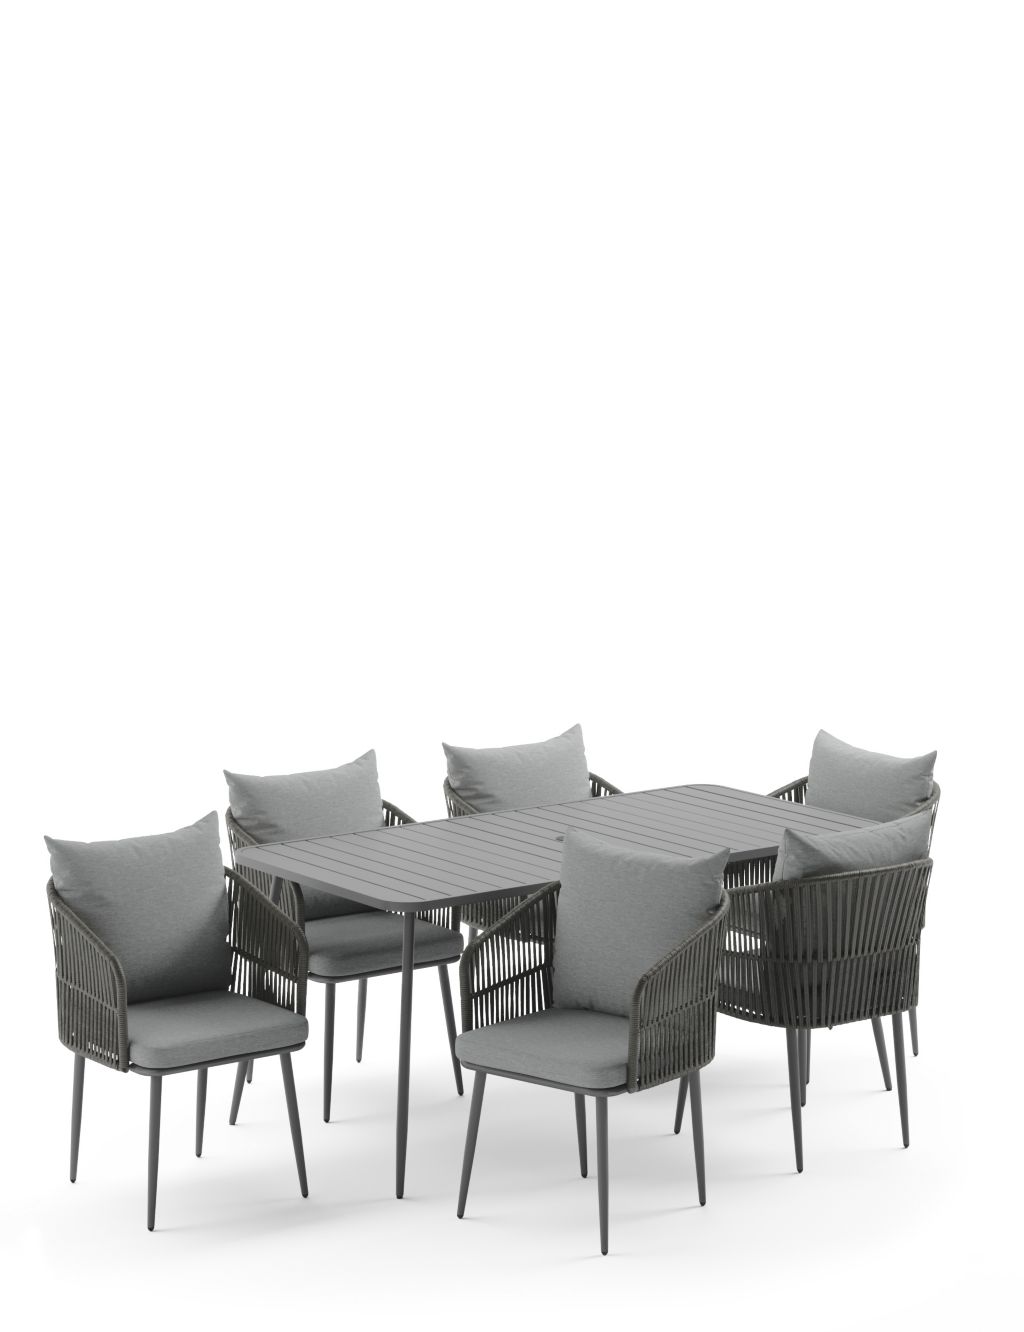 Melbourne 6 Seater Garden Dining Table & Chairs